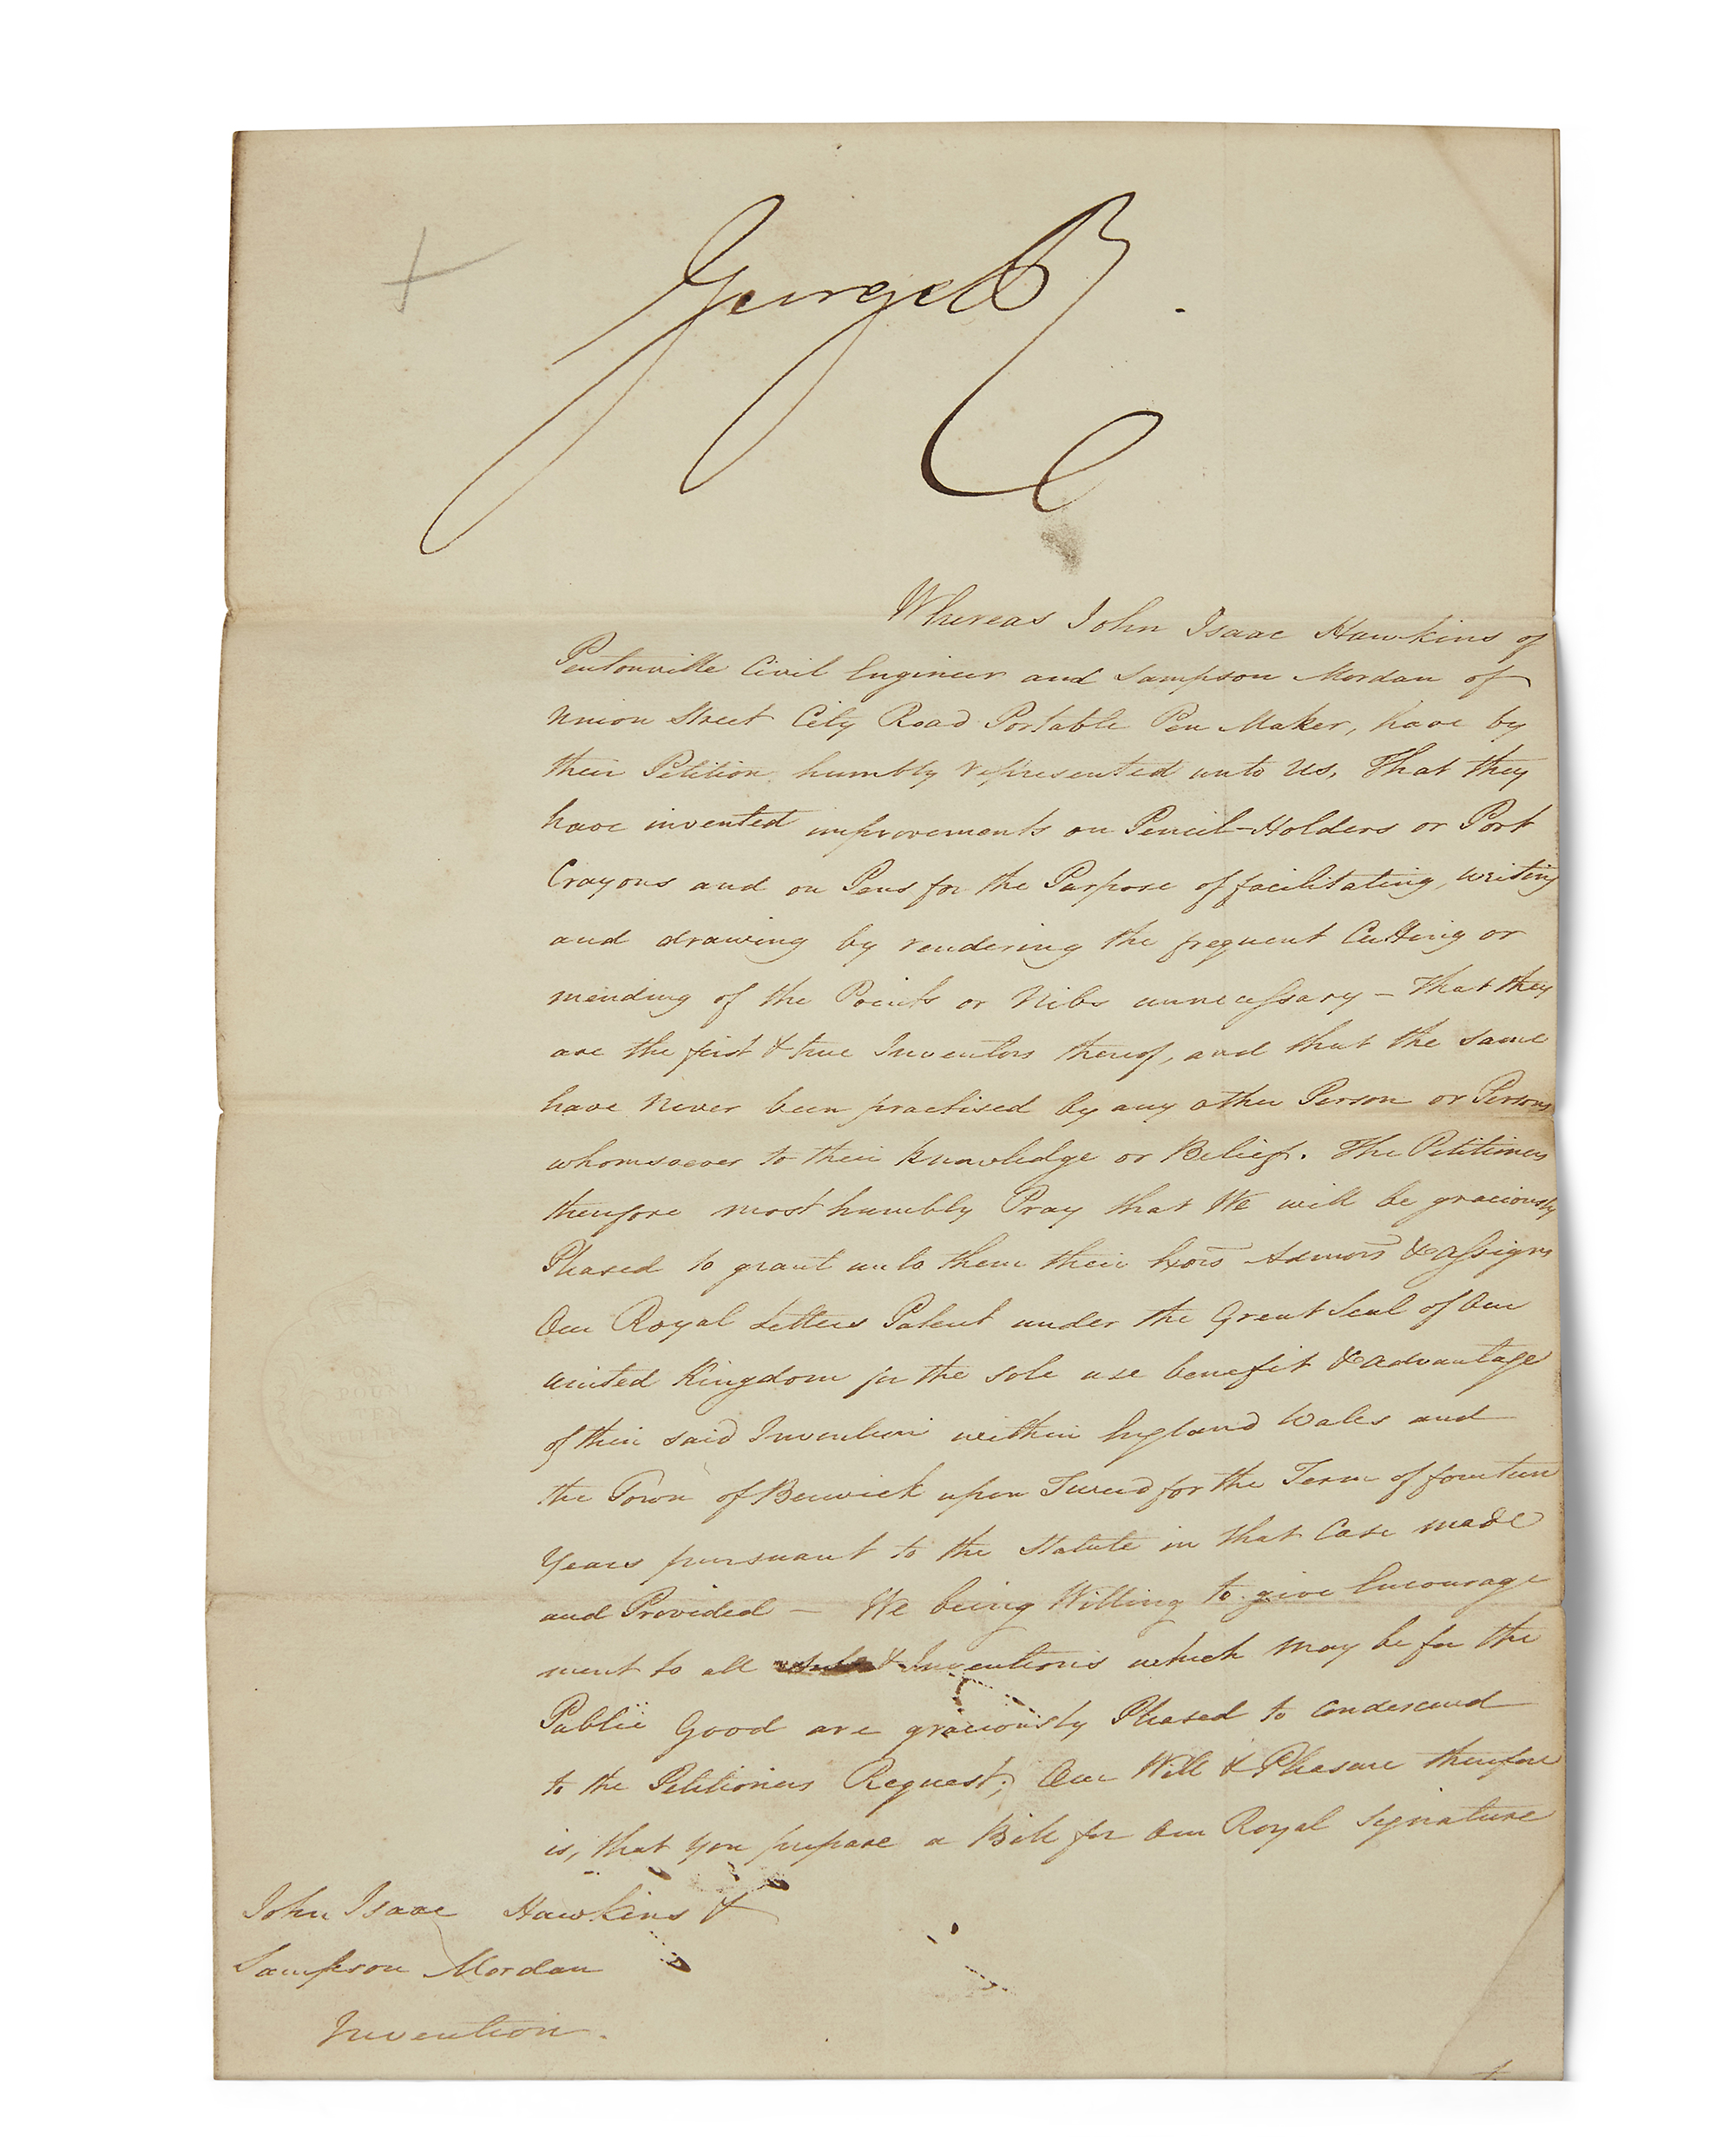 A document issued by the British Government granting John Isaac Hawkins and Sampson Mordan to app...